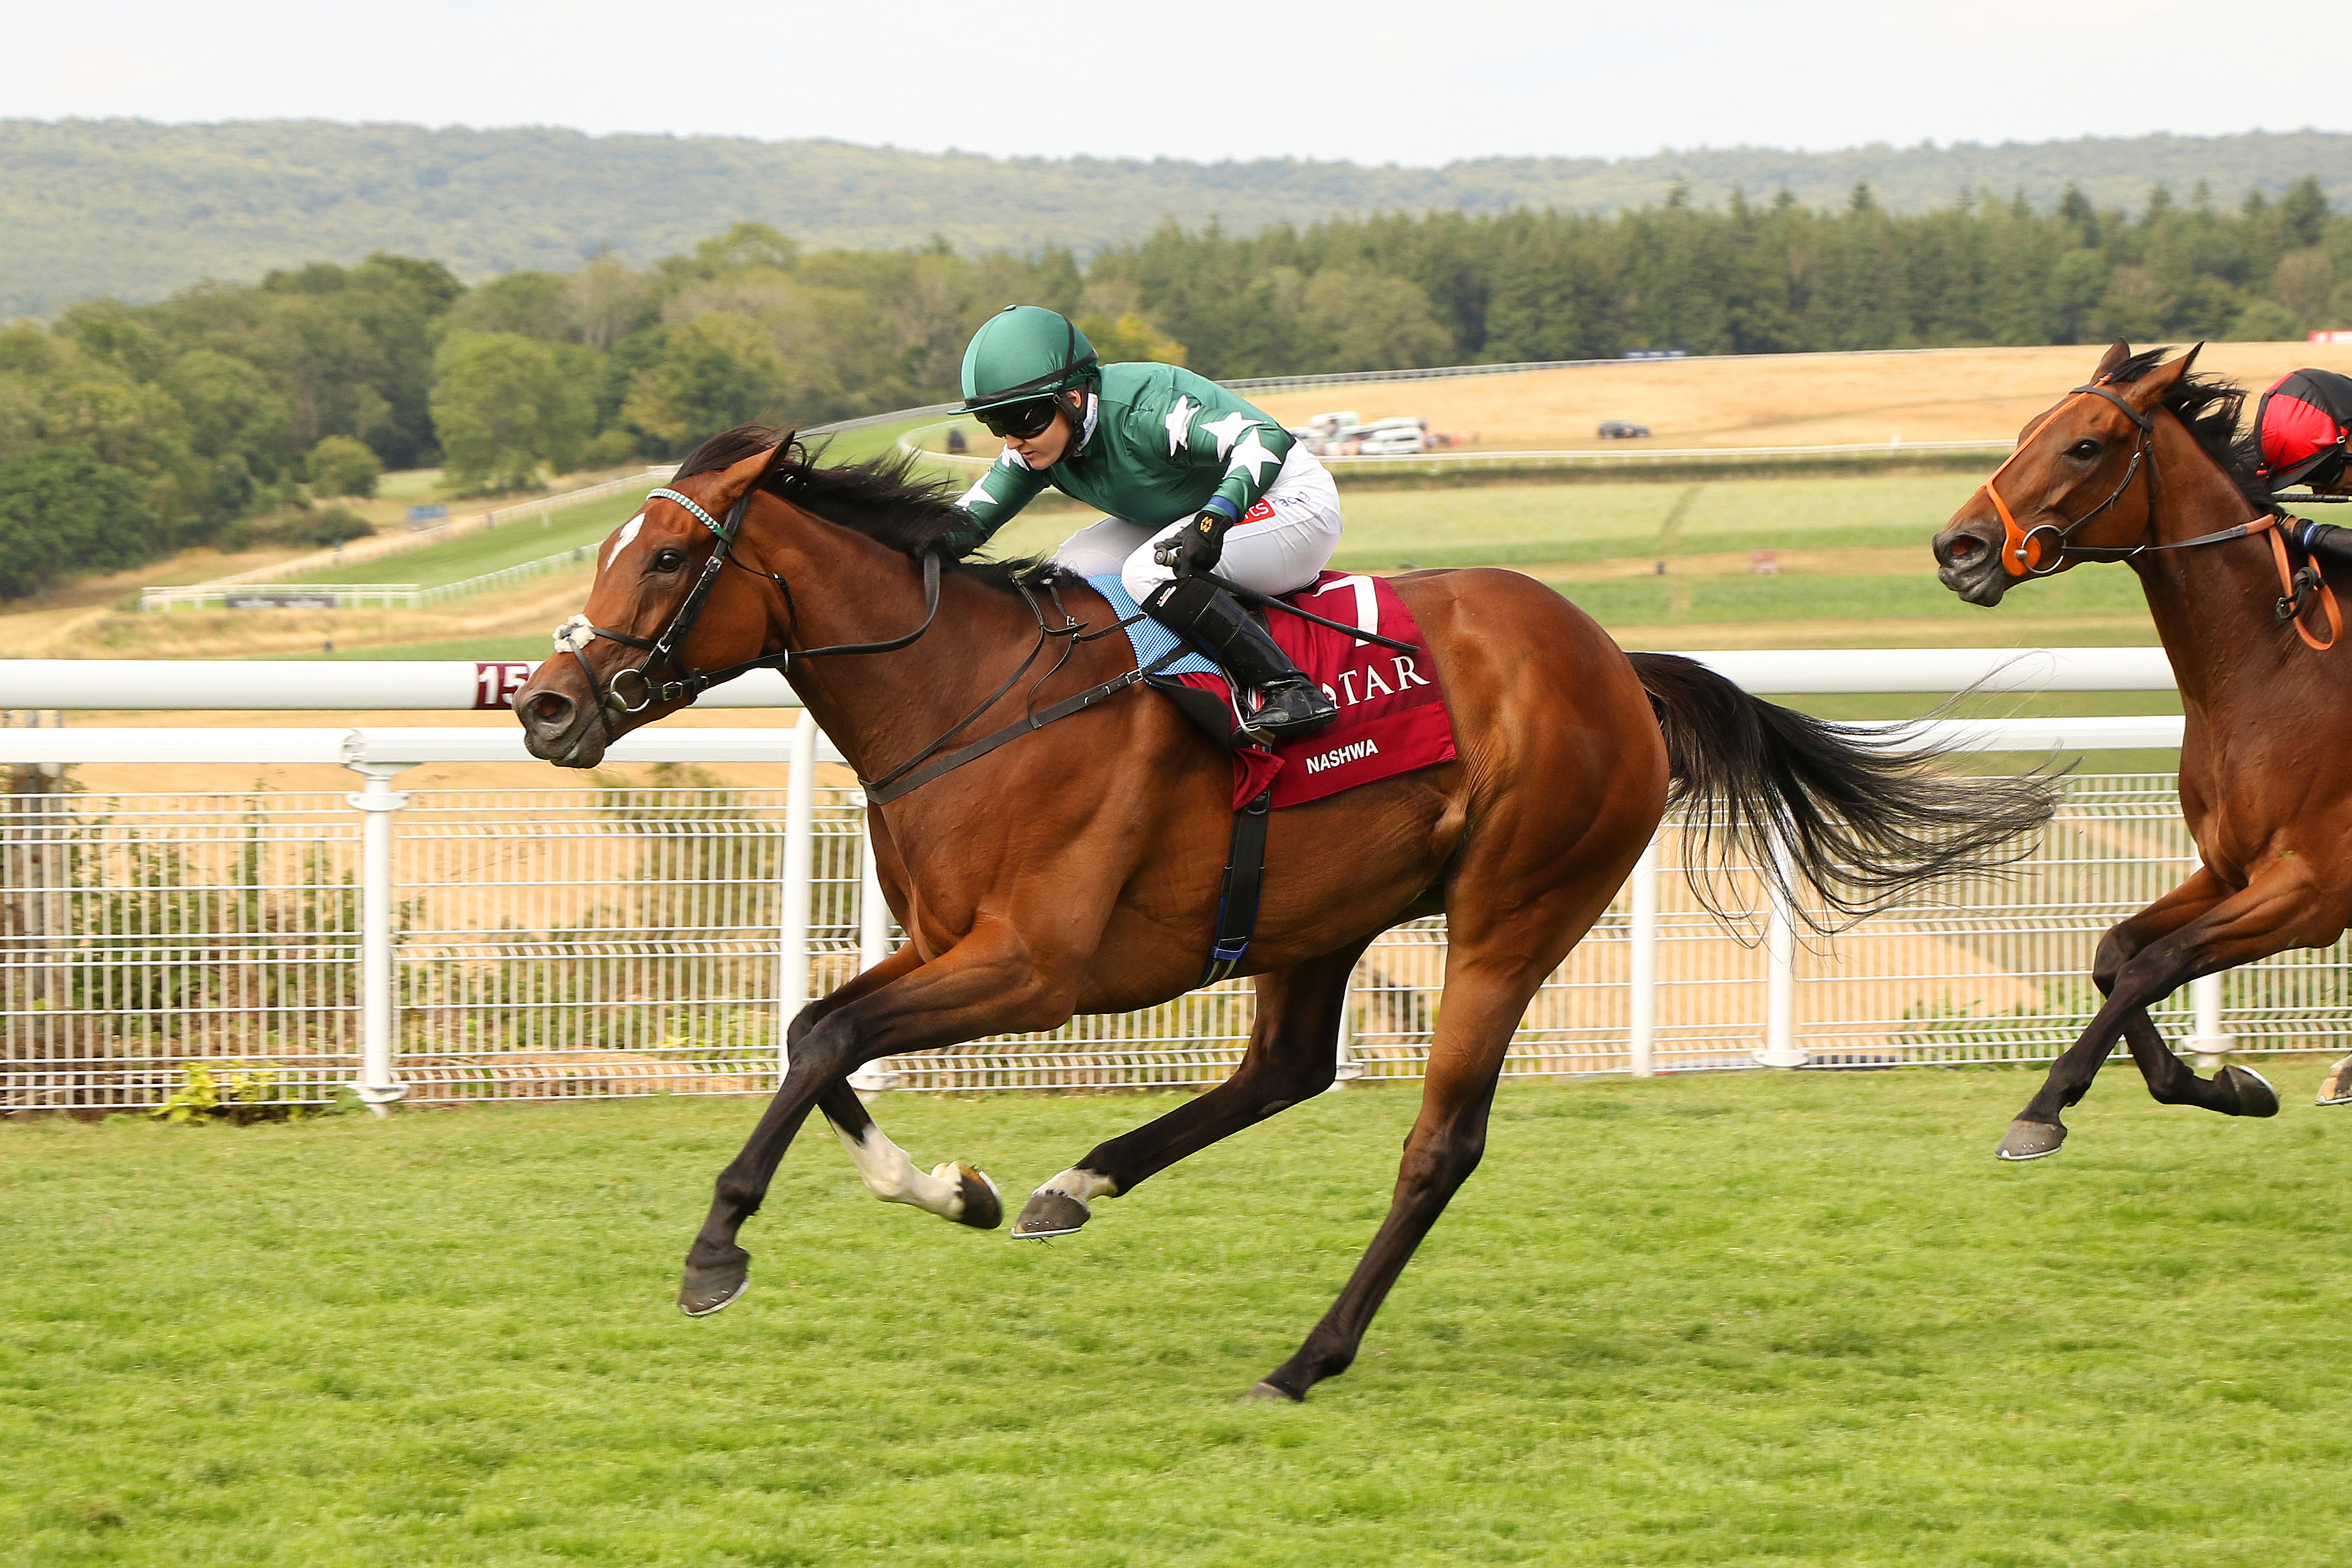 Hollie Doyle steers Nashwa to victory in the Nassau Stakes at Glorious Goodwood. Photo: Racingfotos.com
